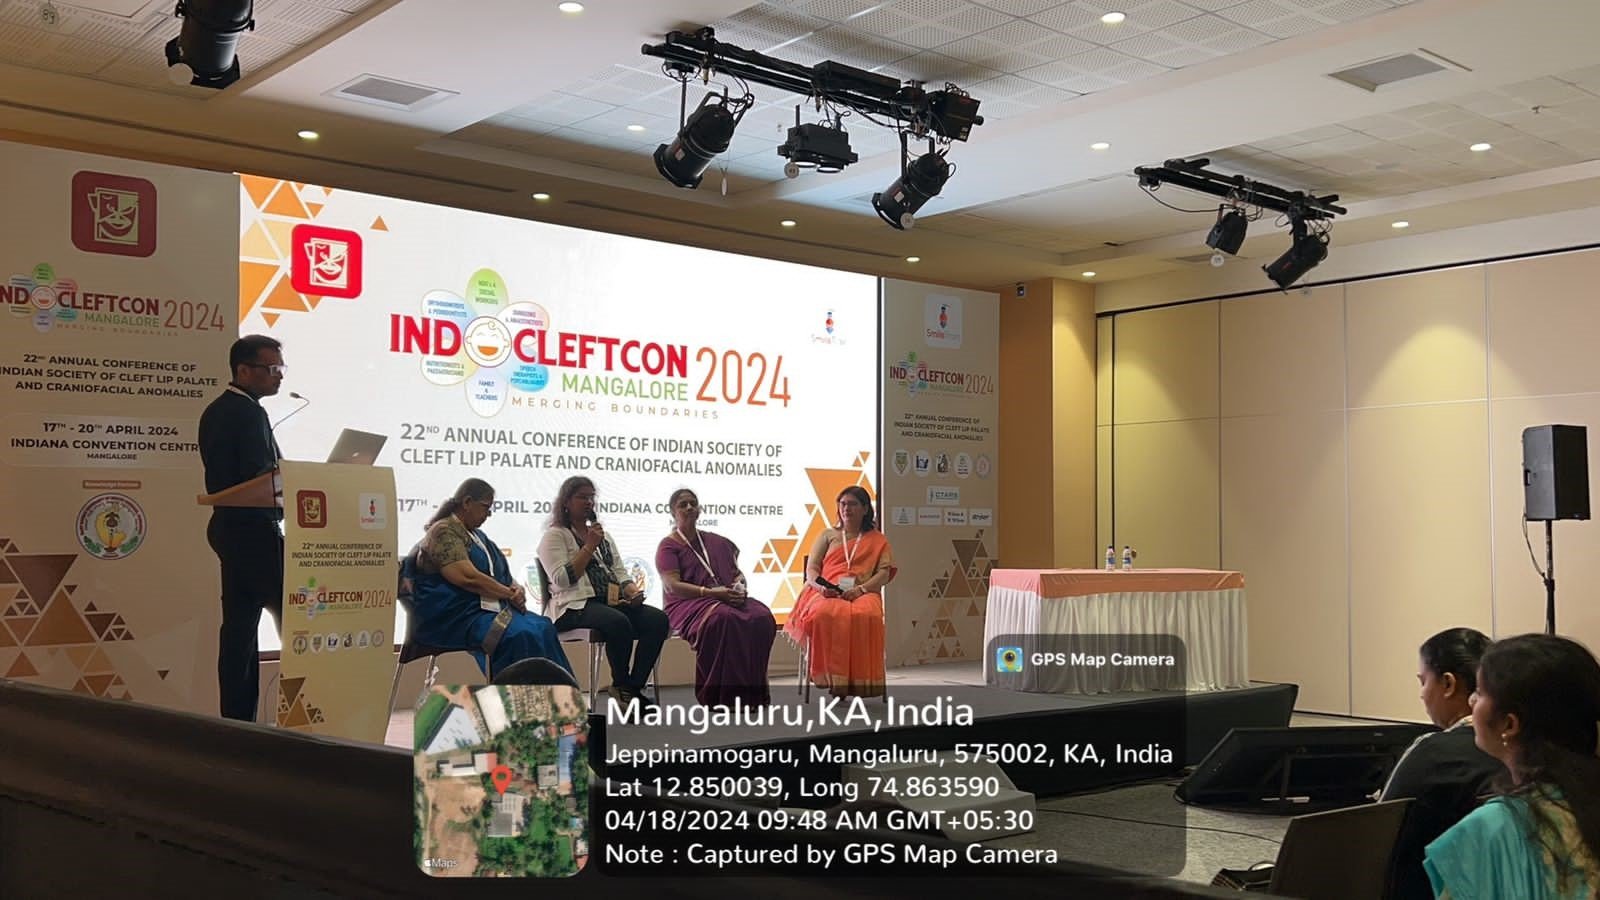 Dr. Aarti Waknis, Professor in Speech Language Pathology and Vice Principal, Bharati Vidyapeeth(DU) School of Audiology and Speech Language Pathology at INDOCLEFTCON